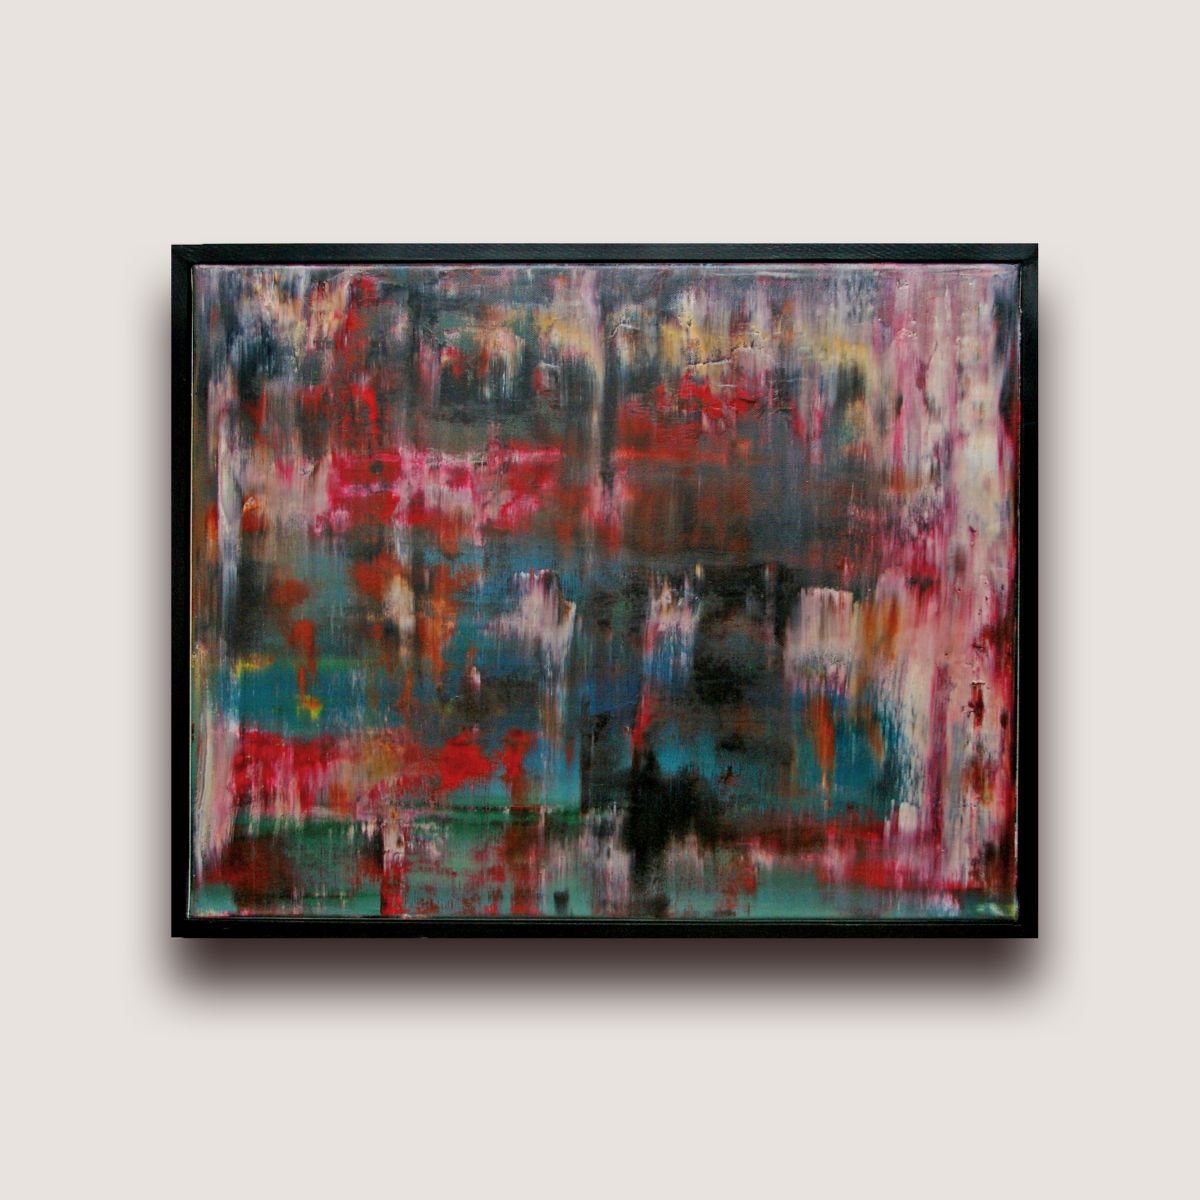 Dragged Paint Abstract - Ab15 xix by Matthew Withey